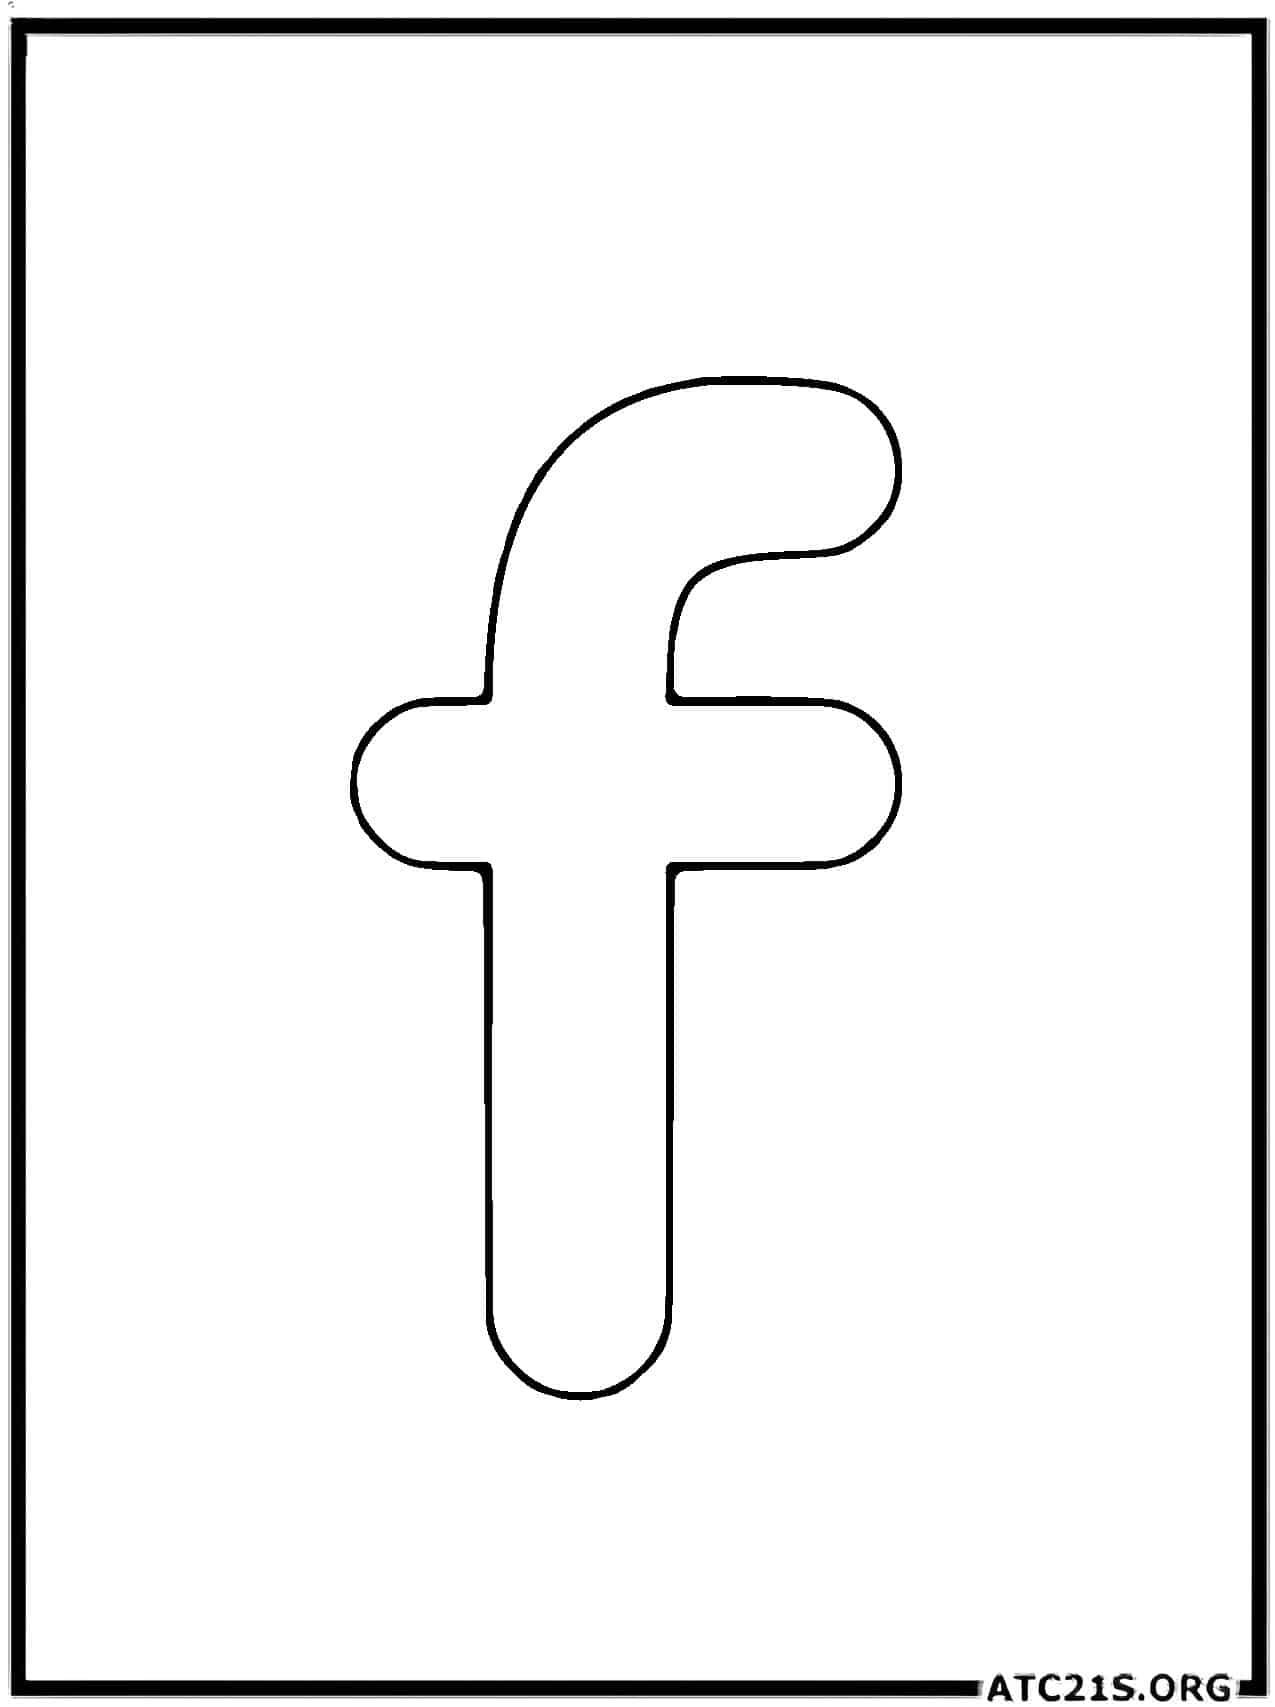 letter_f_lowercase_coloring_page